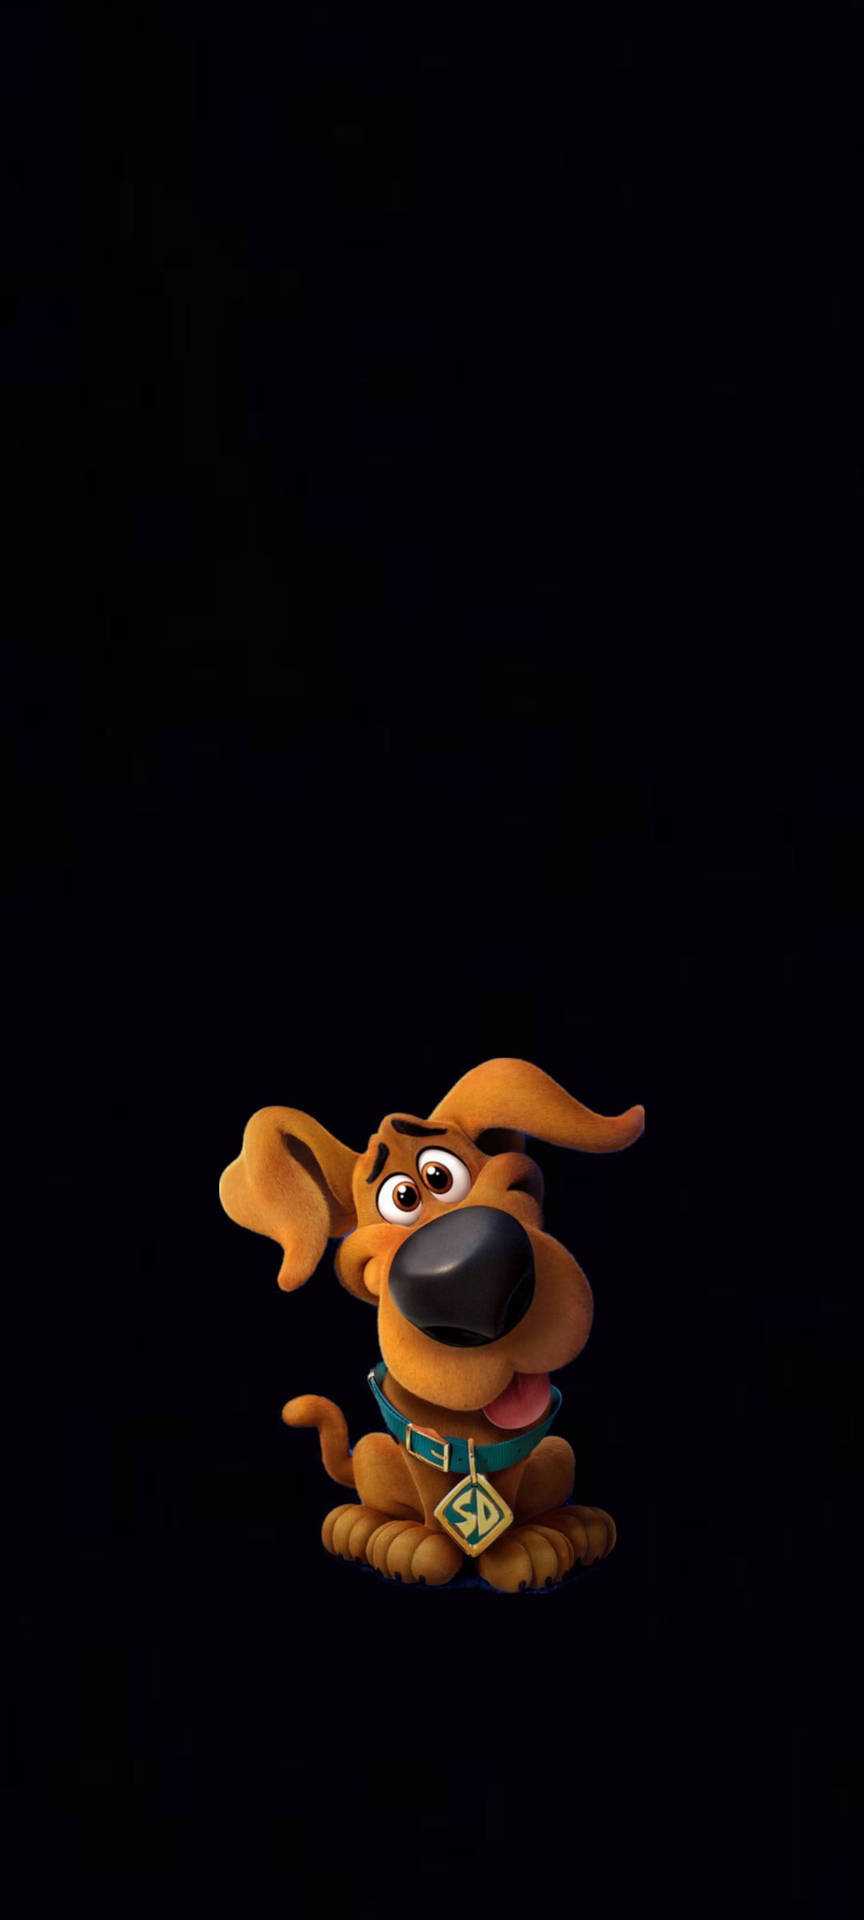 AMOLED Android Baby Scooby-Doo Wallpaper